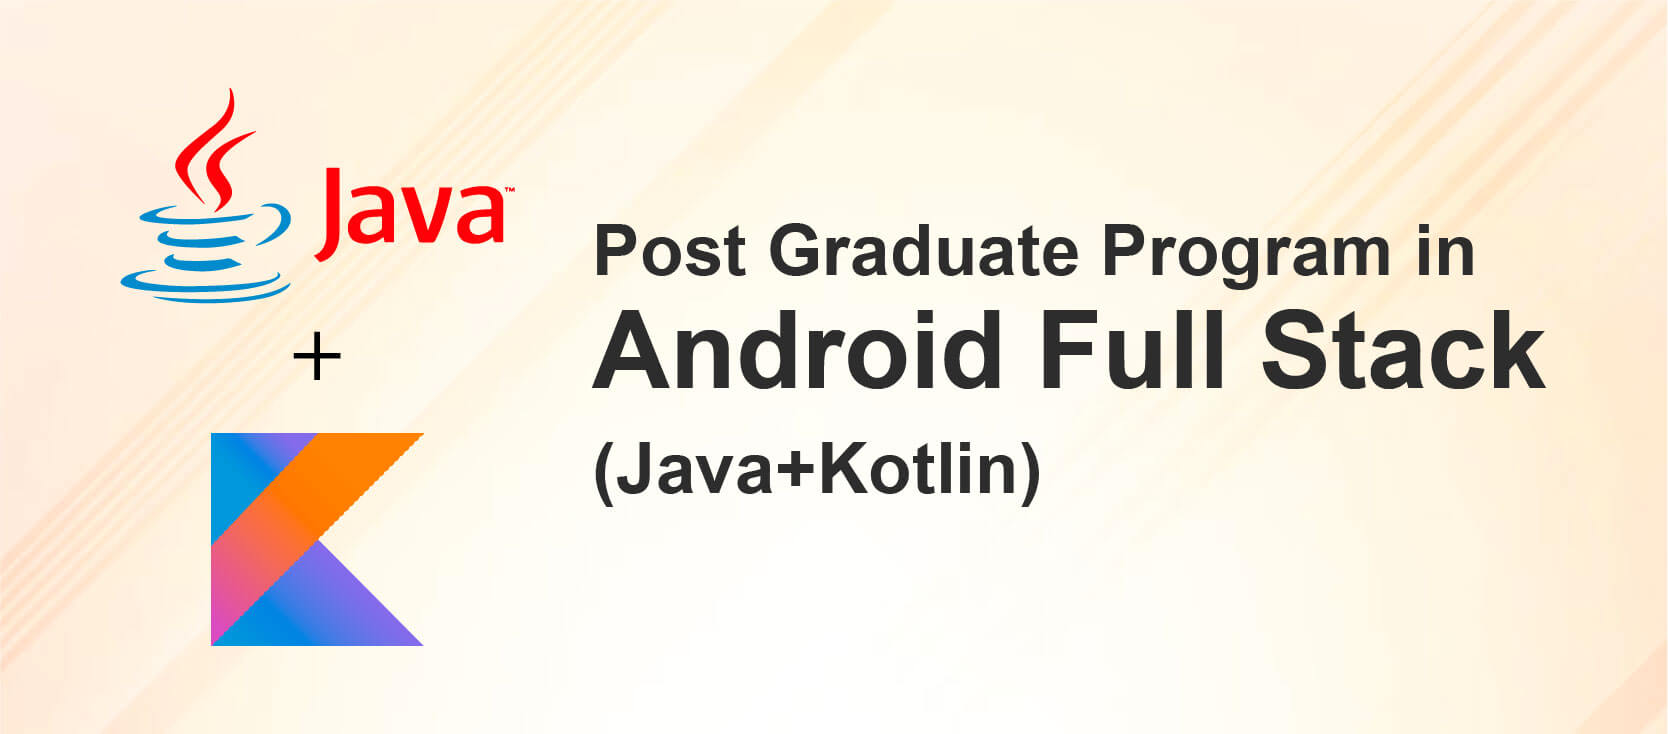 PG Program in Android Course